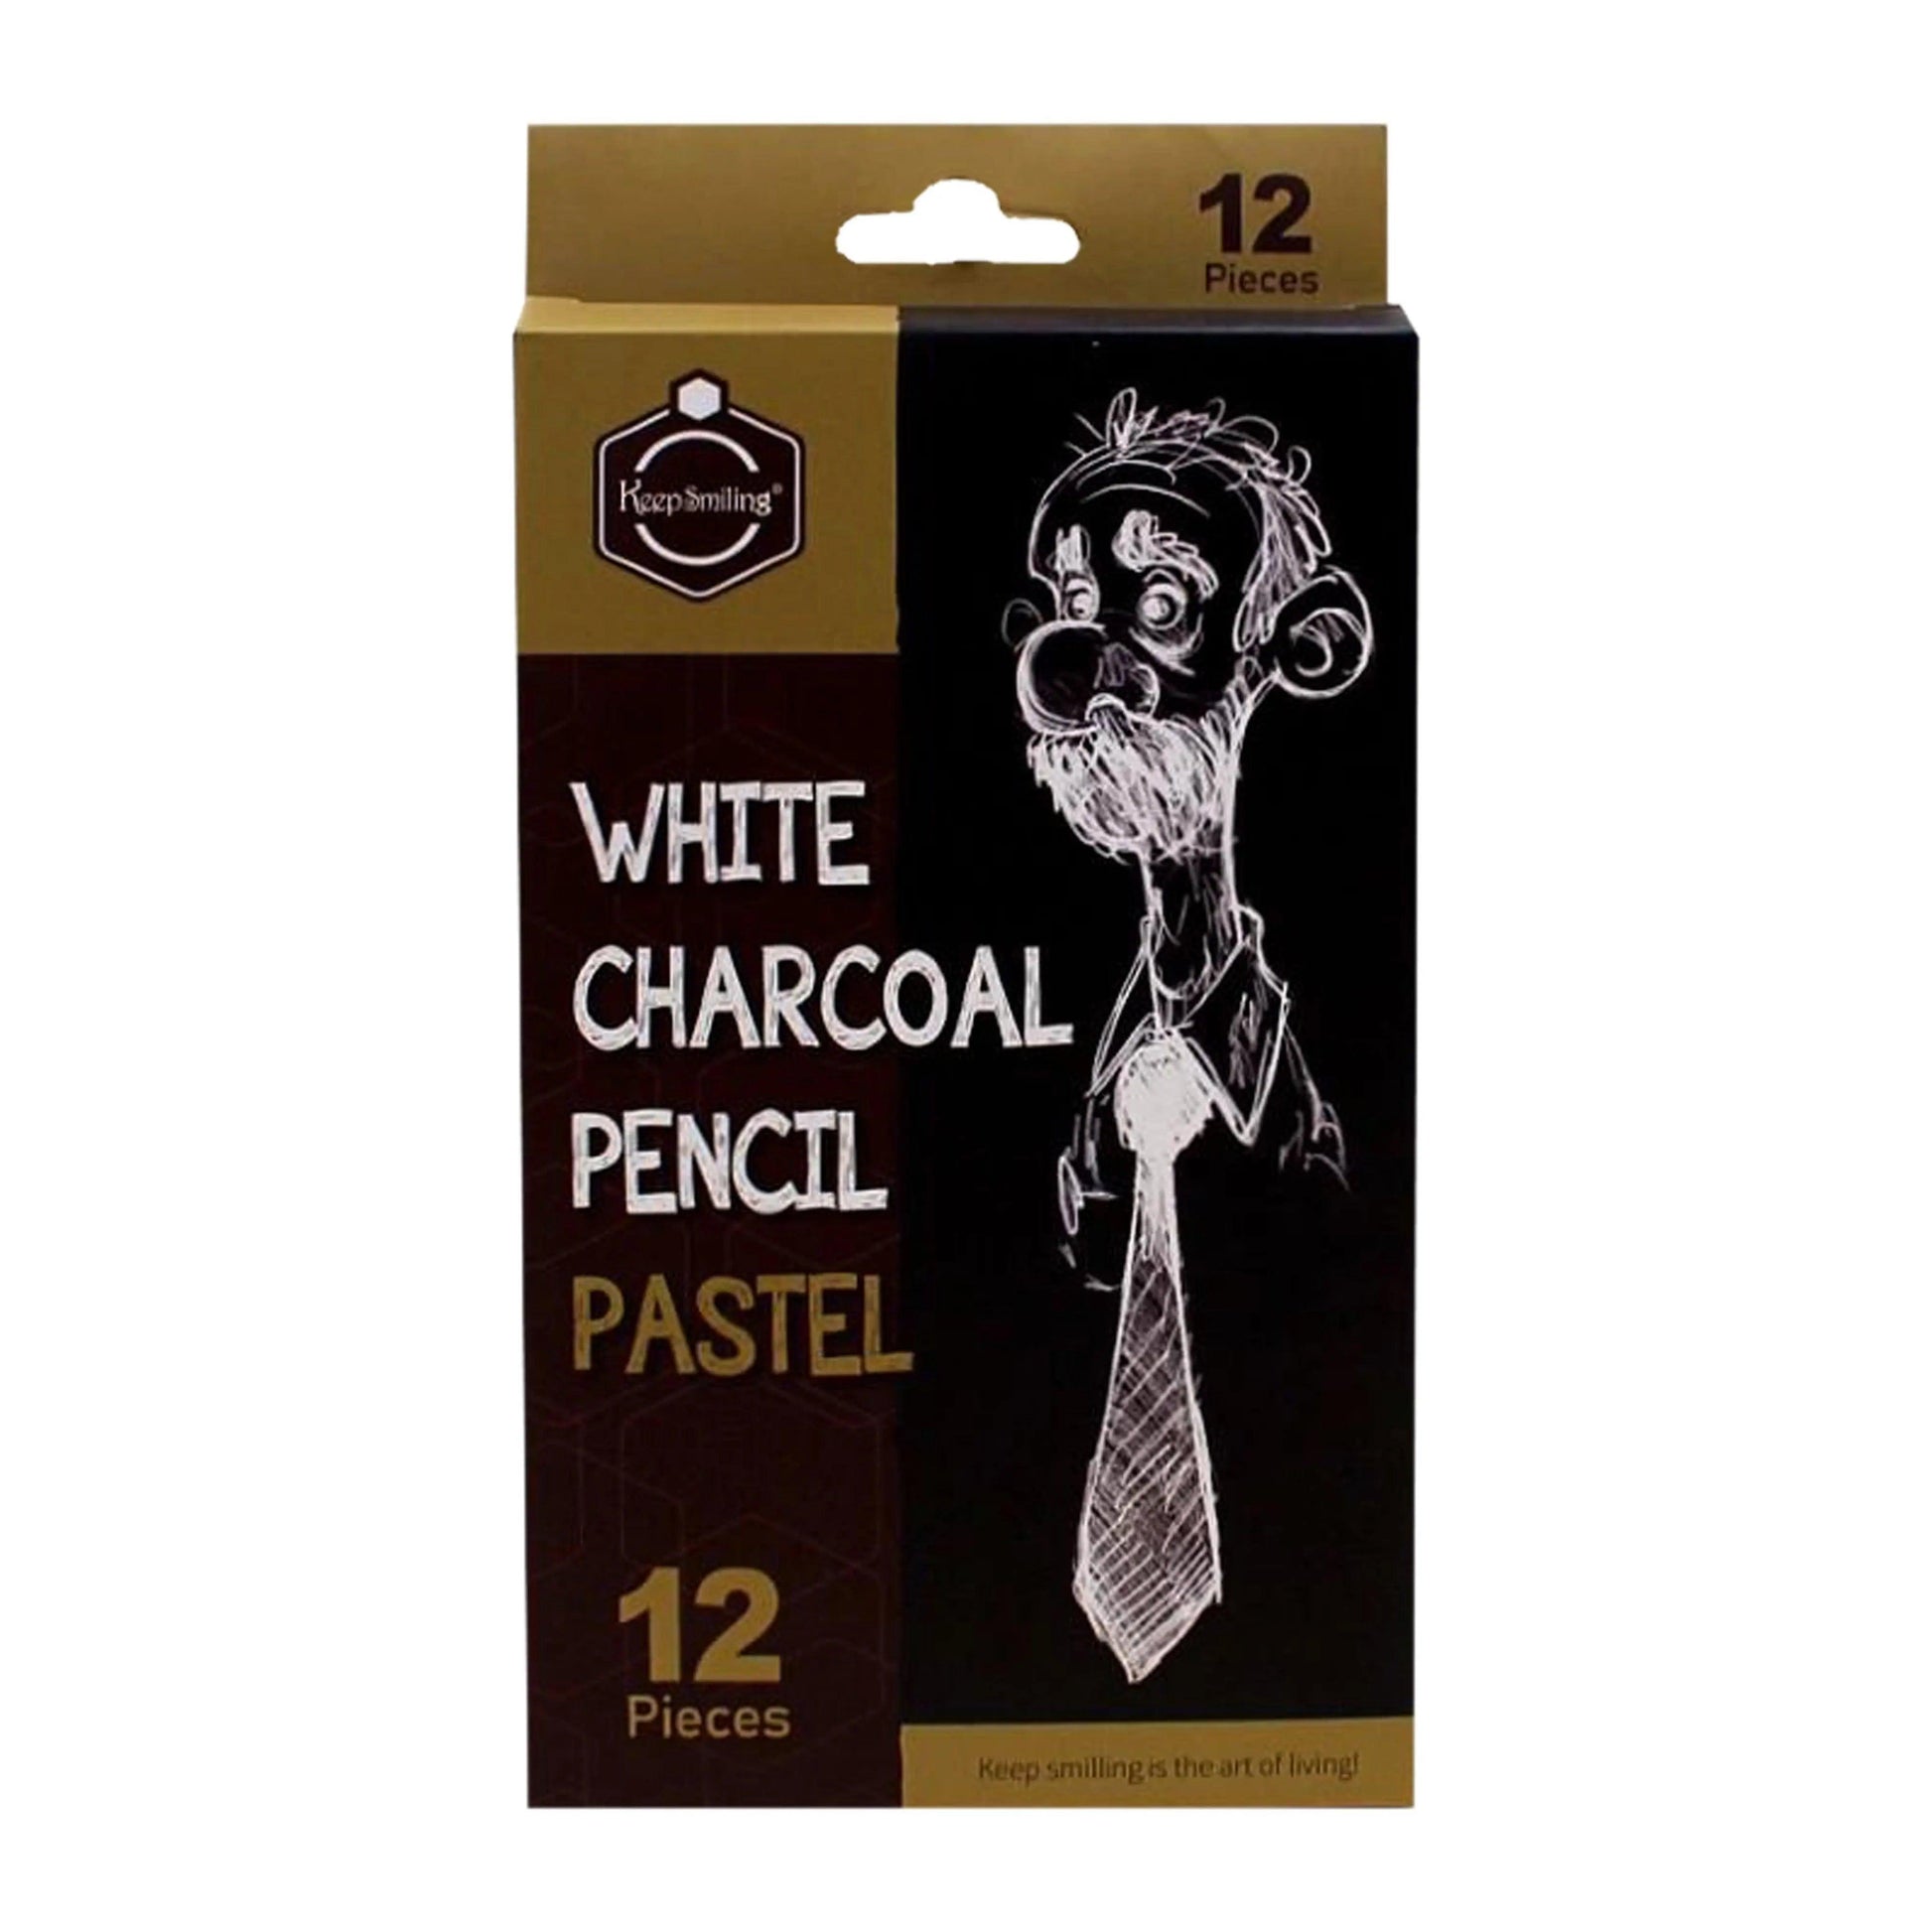 Keep Smiling White Charcoal Pencil Pastel Pack Of 12 The Stationers